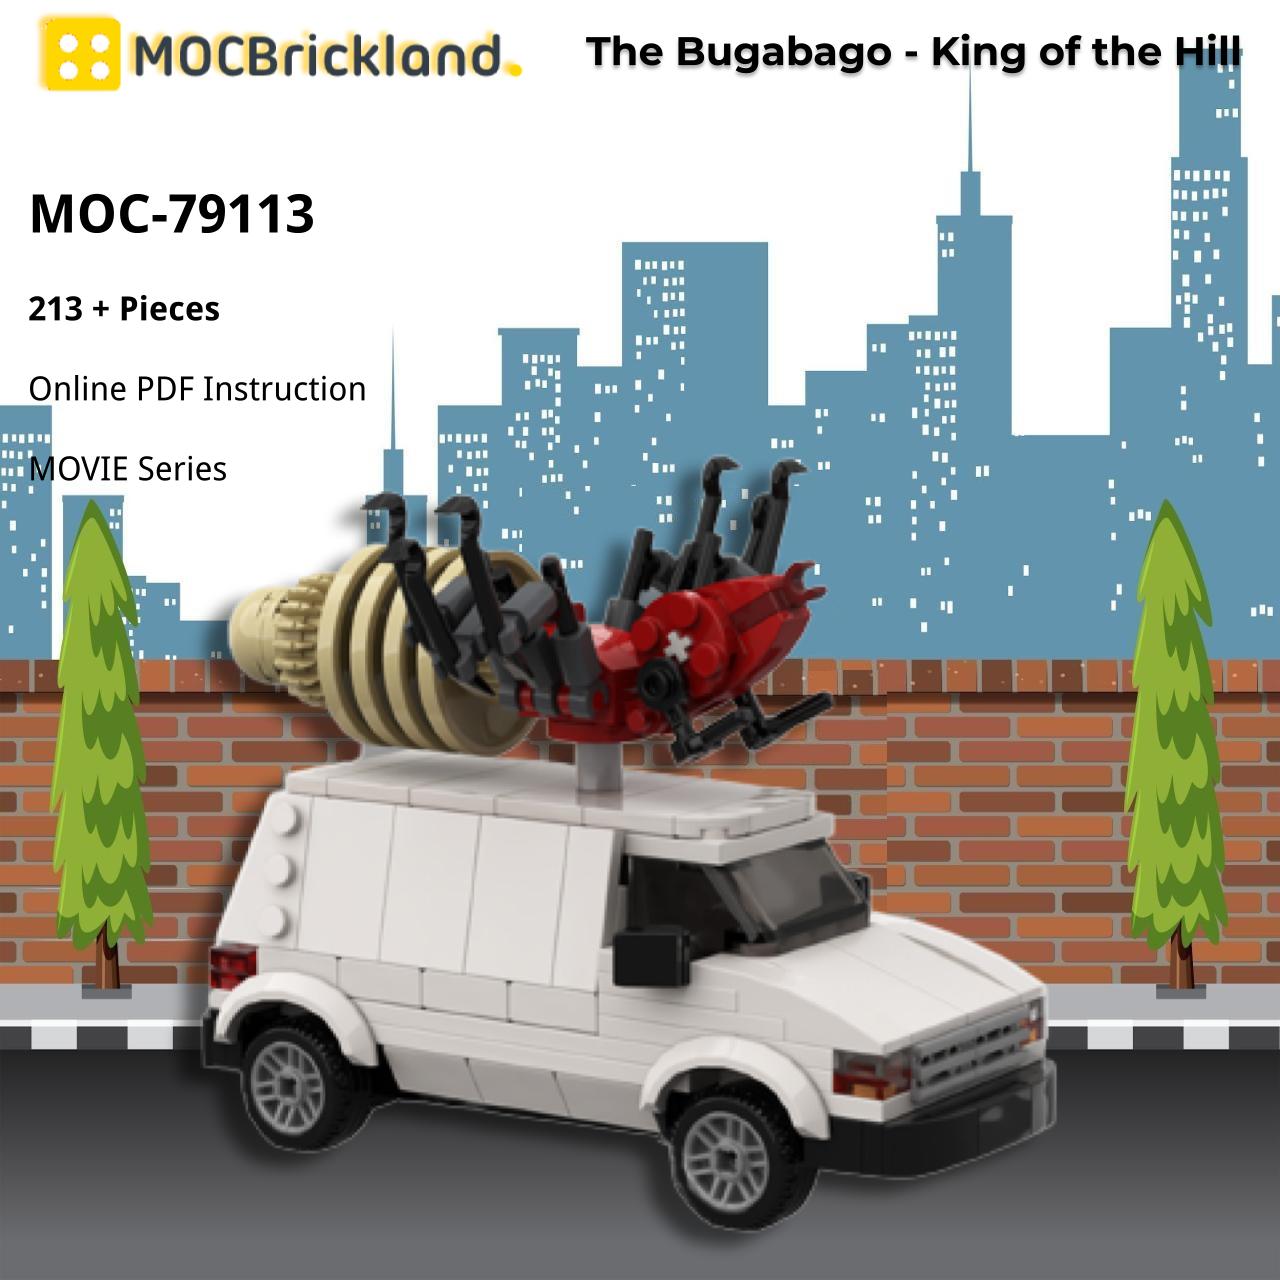 movie moc 79113 the bugabago king of the hill by bricole mocbrickland 8897